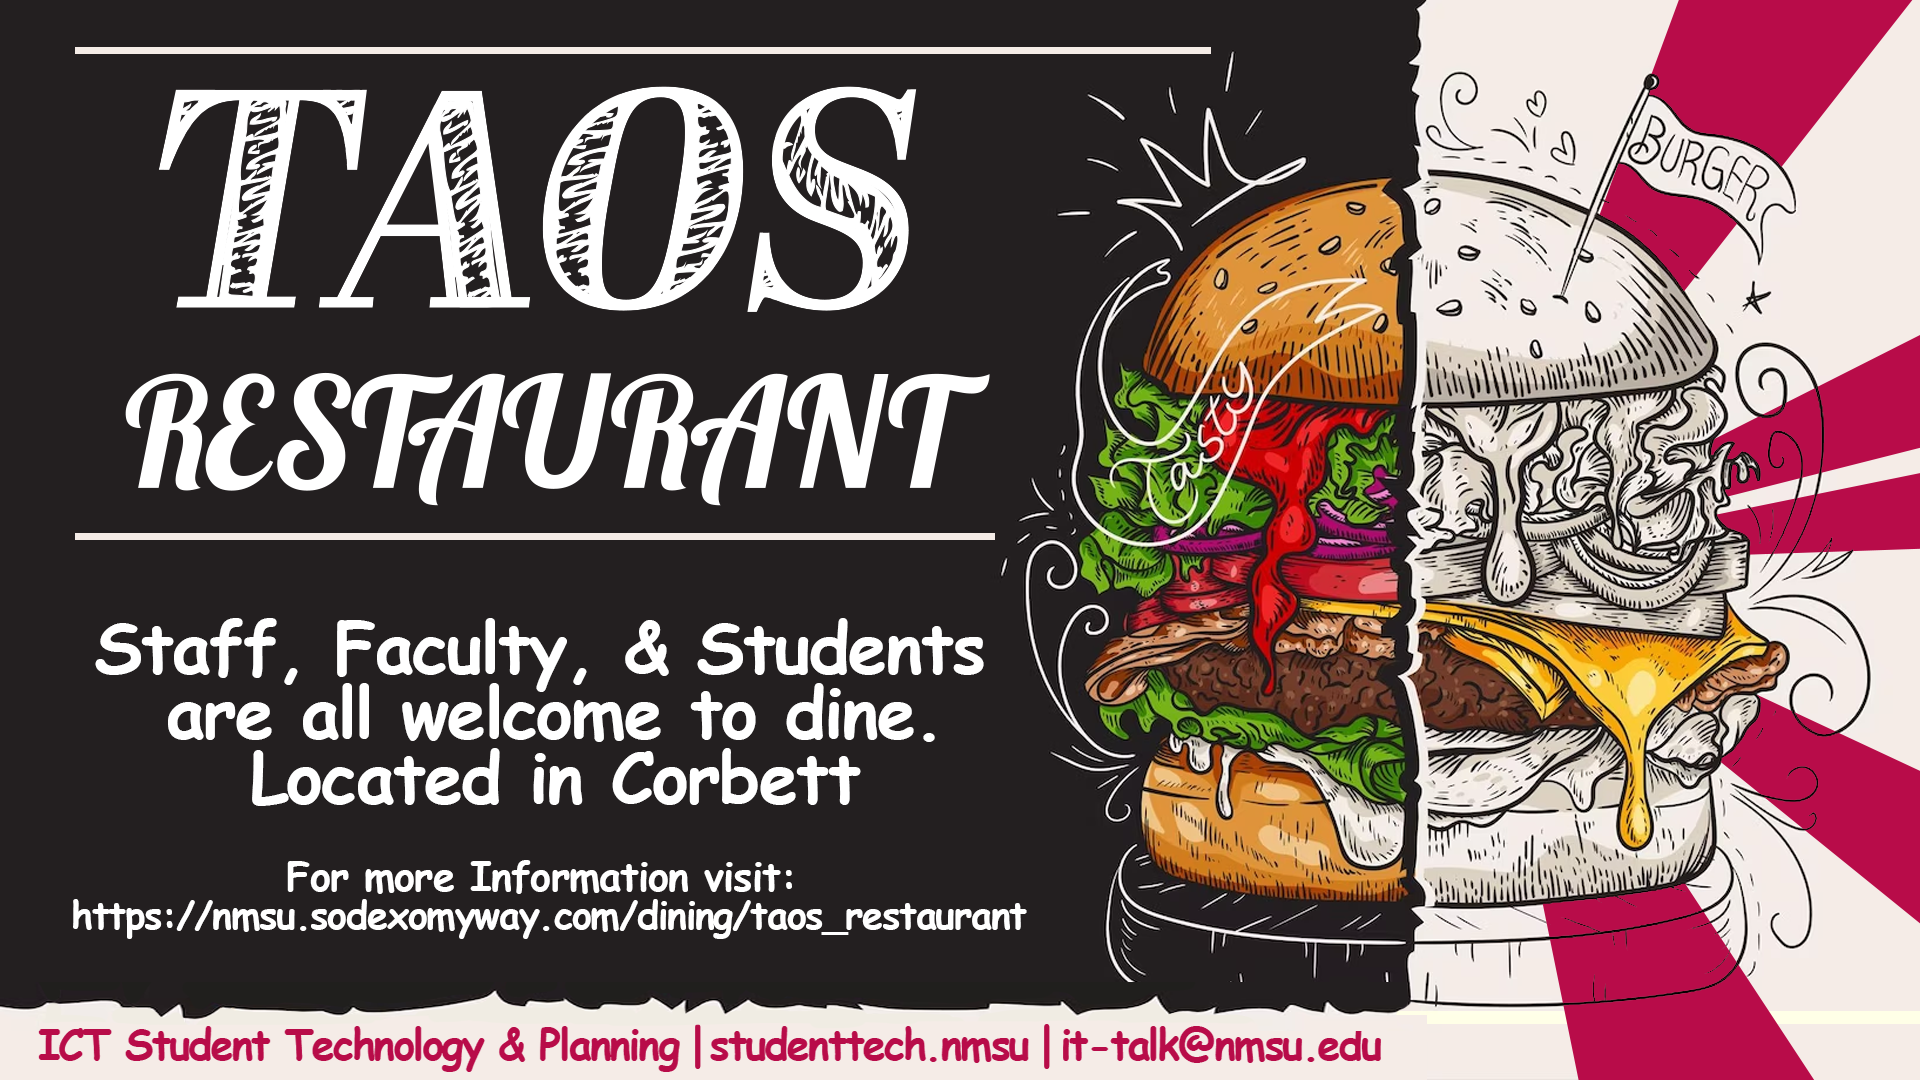 Taos restaurant - staff, faculty, & students are all welcome to dine. Fore more information visit: nmsu.sodexomyway.com/dining/taos_restaurant.